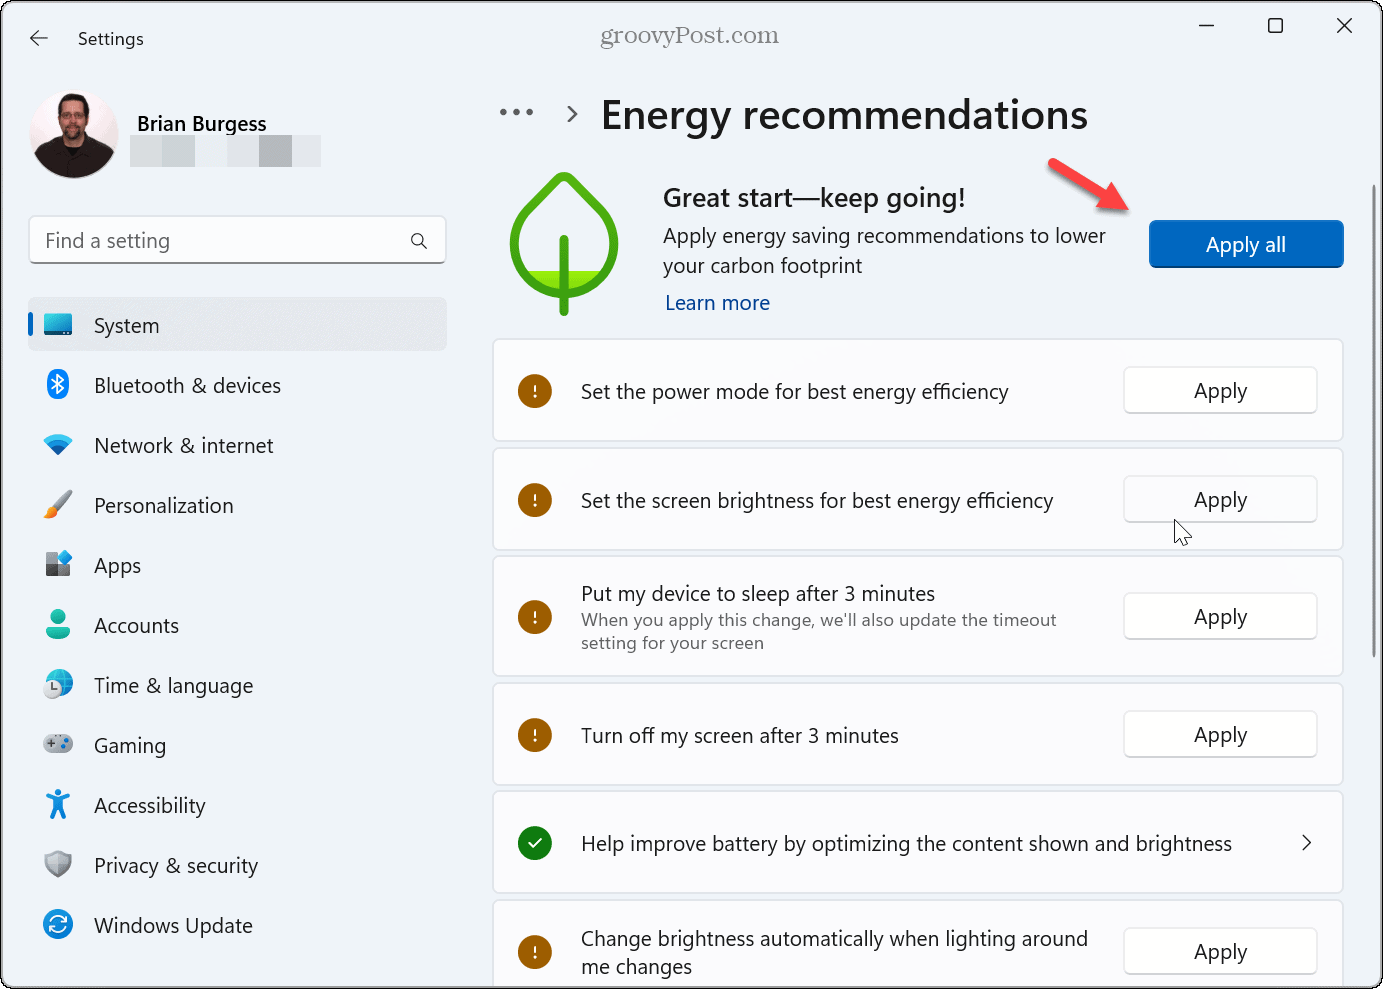 How to Apply Energy Recommendations on Windows 11 - 40